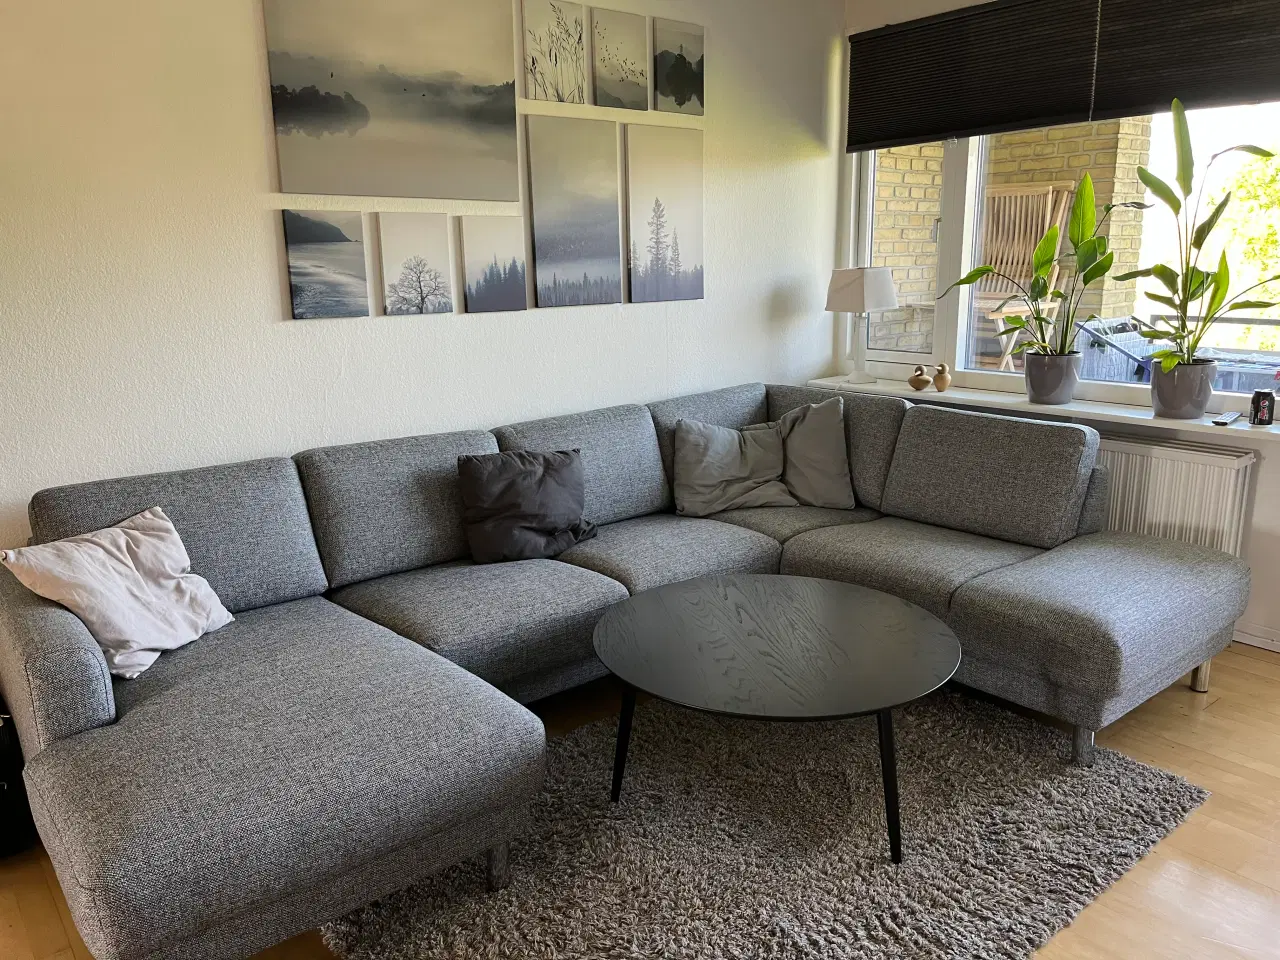 Billede 2 - Sofa med chaiselong 5 pers.